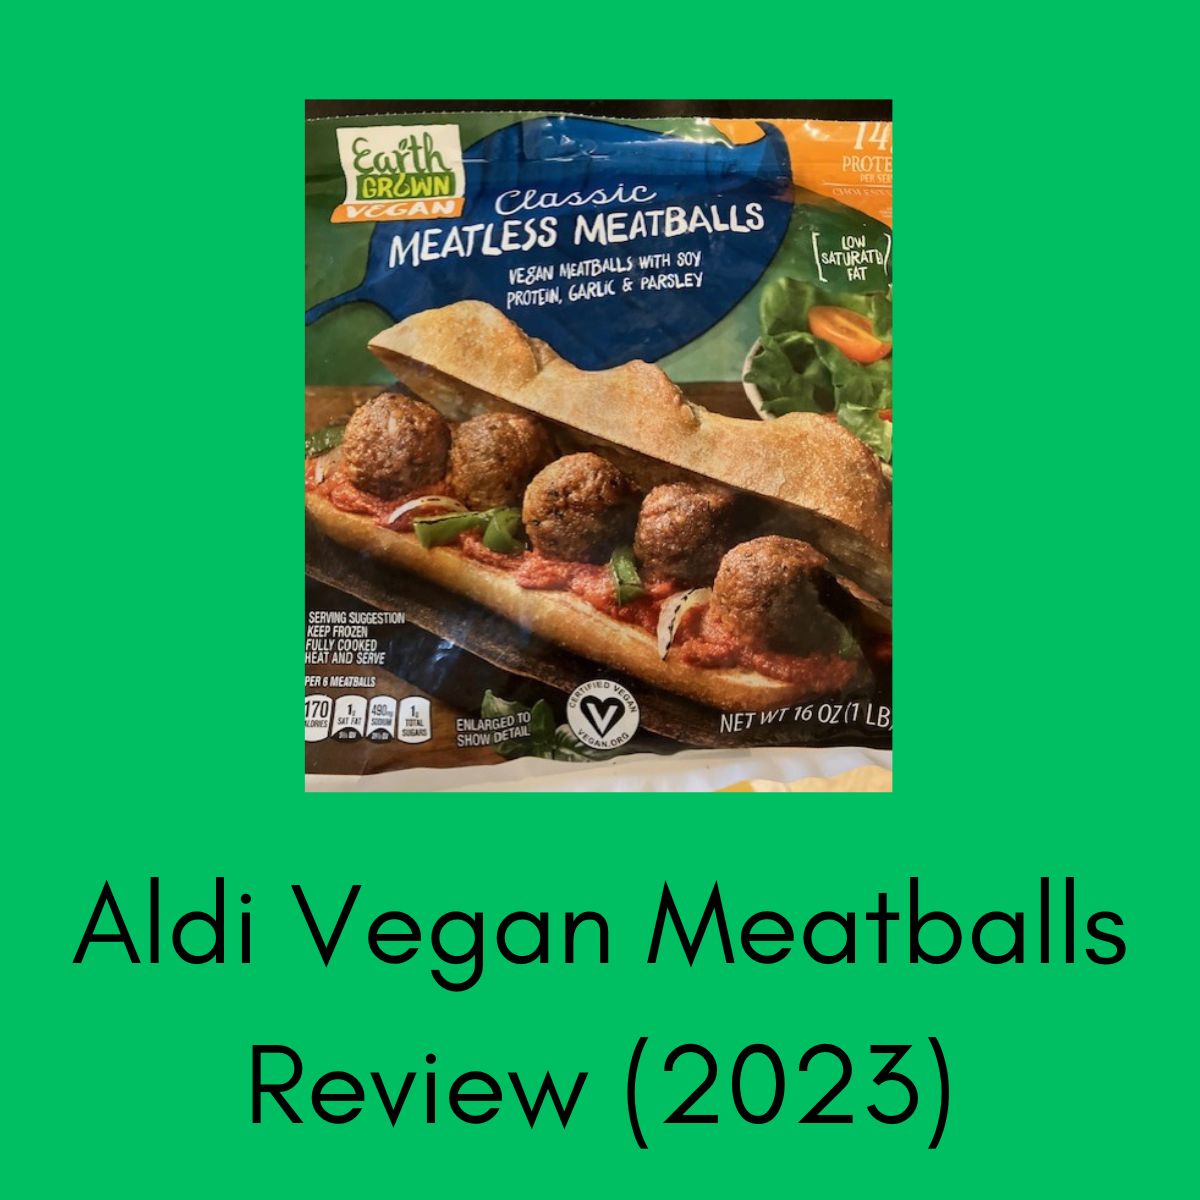 picture of a package of Aldi Vegan meatballs (earth grown brand). Text reads: Aldi Vegan Meatballs Review (2023)